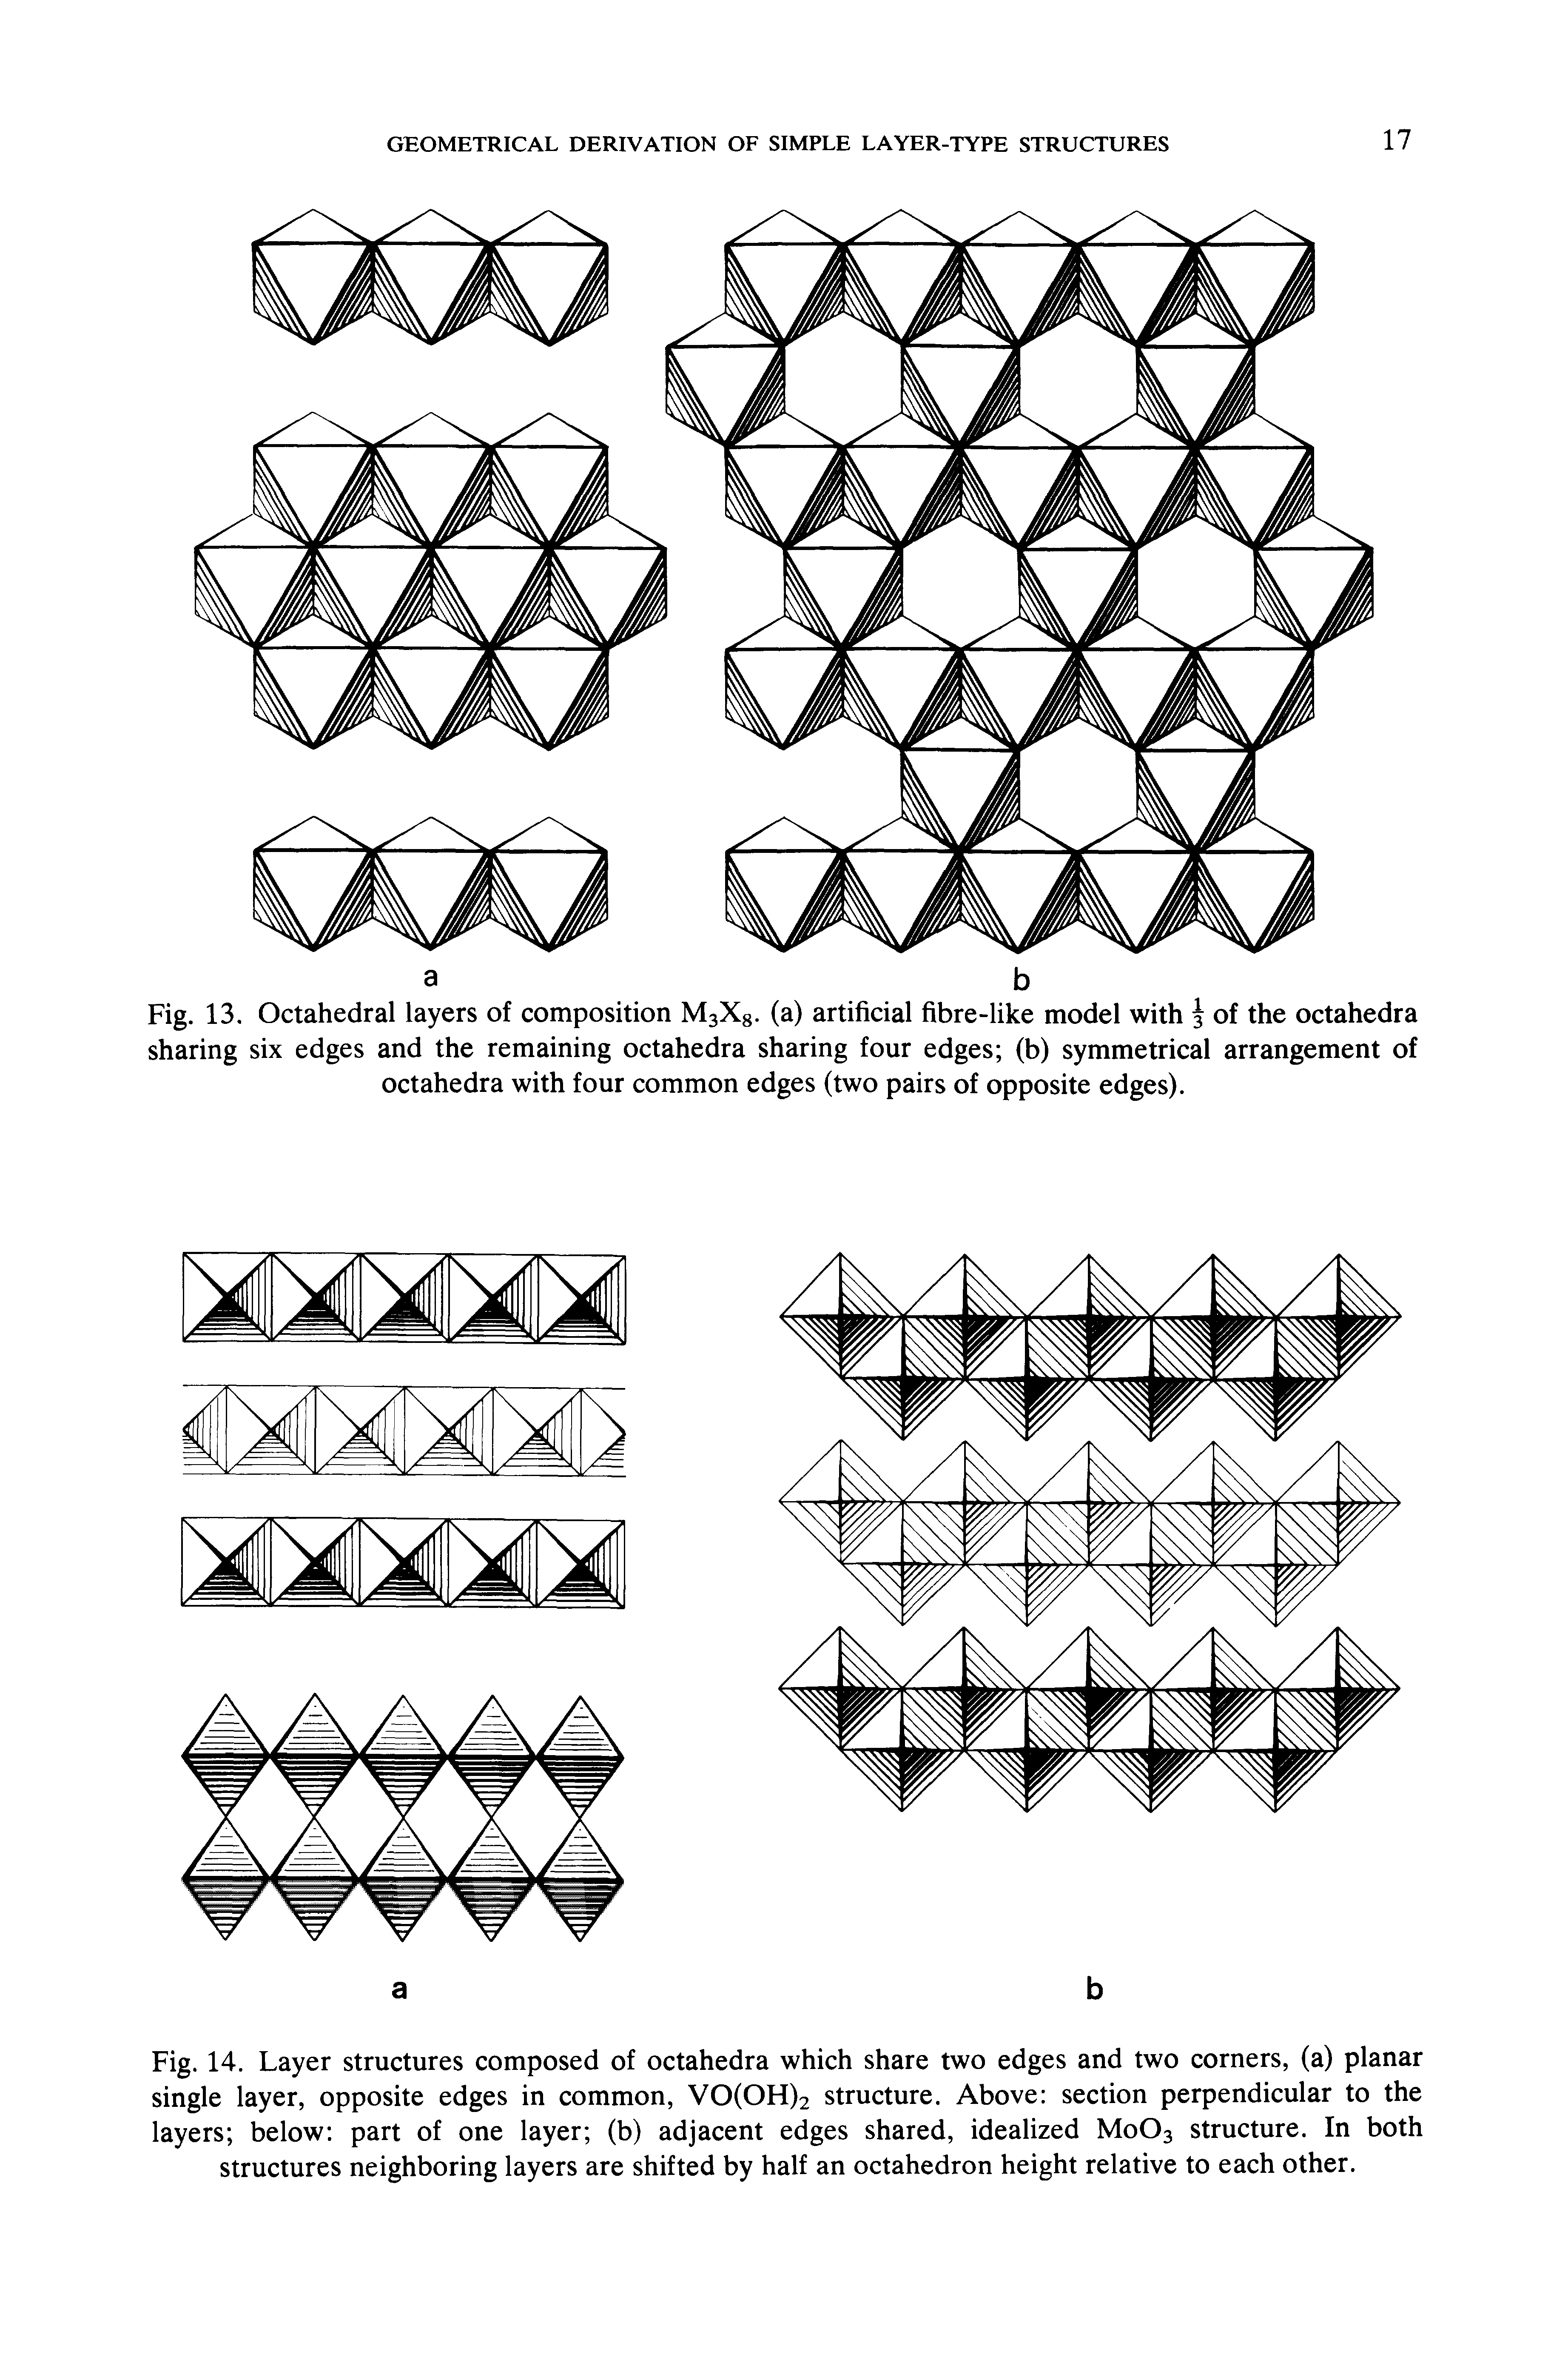 Fig. 14. Layer structures composed of octahedra which share two edges and two corners, (a) planar single layer, opposite edges in common, VO(OH)2 structure. Above section perpendicular to the layers below part of one layer (b) adjacent edges shared, idealized M0O3 structure. In both structures neighboring layers are shifted by half an octahedron height relative to each other.